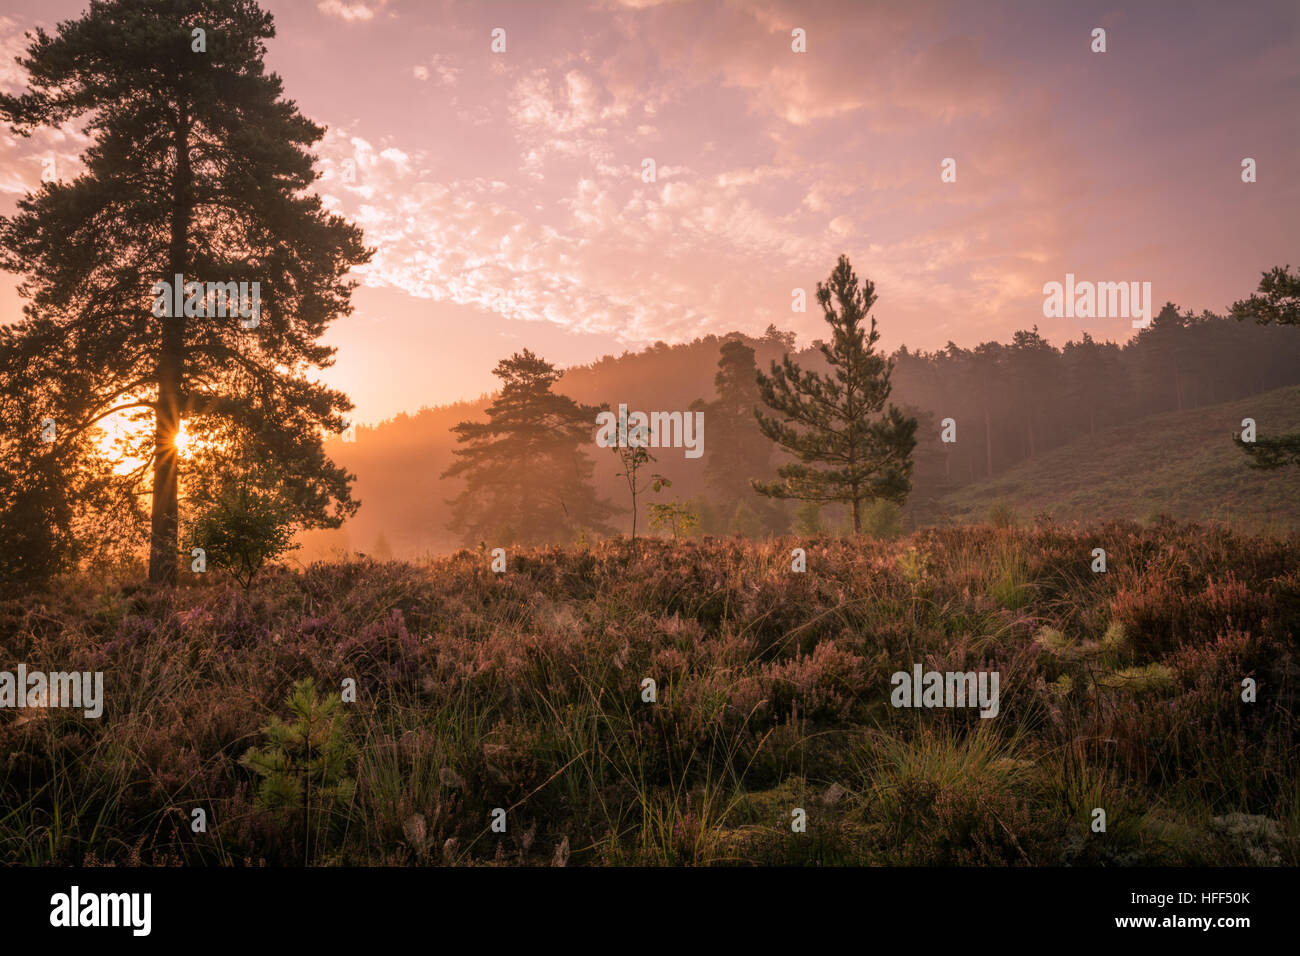 Stunning autumn sunrise in heathland landscape in the Surrey Hills Area of Outstanding Natural Beauty, UK. A beautiful day in the English countryside. Stock Photo